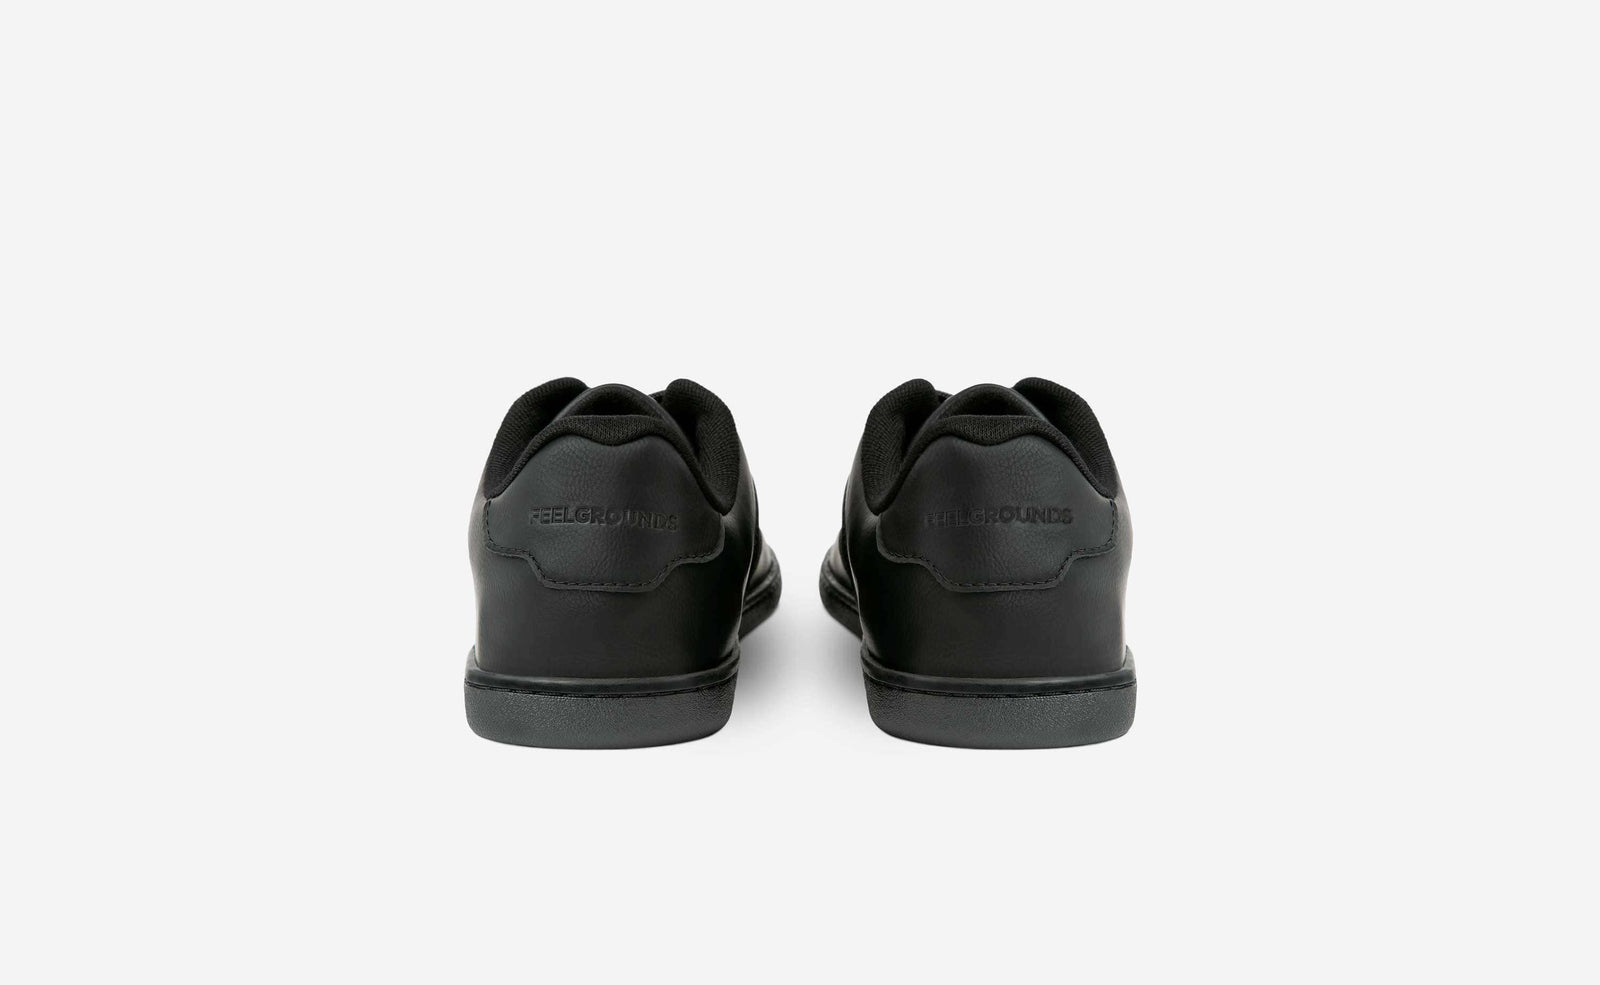 Courtside Classic - All Black ǀ Feelgrounds